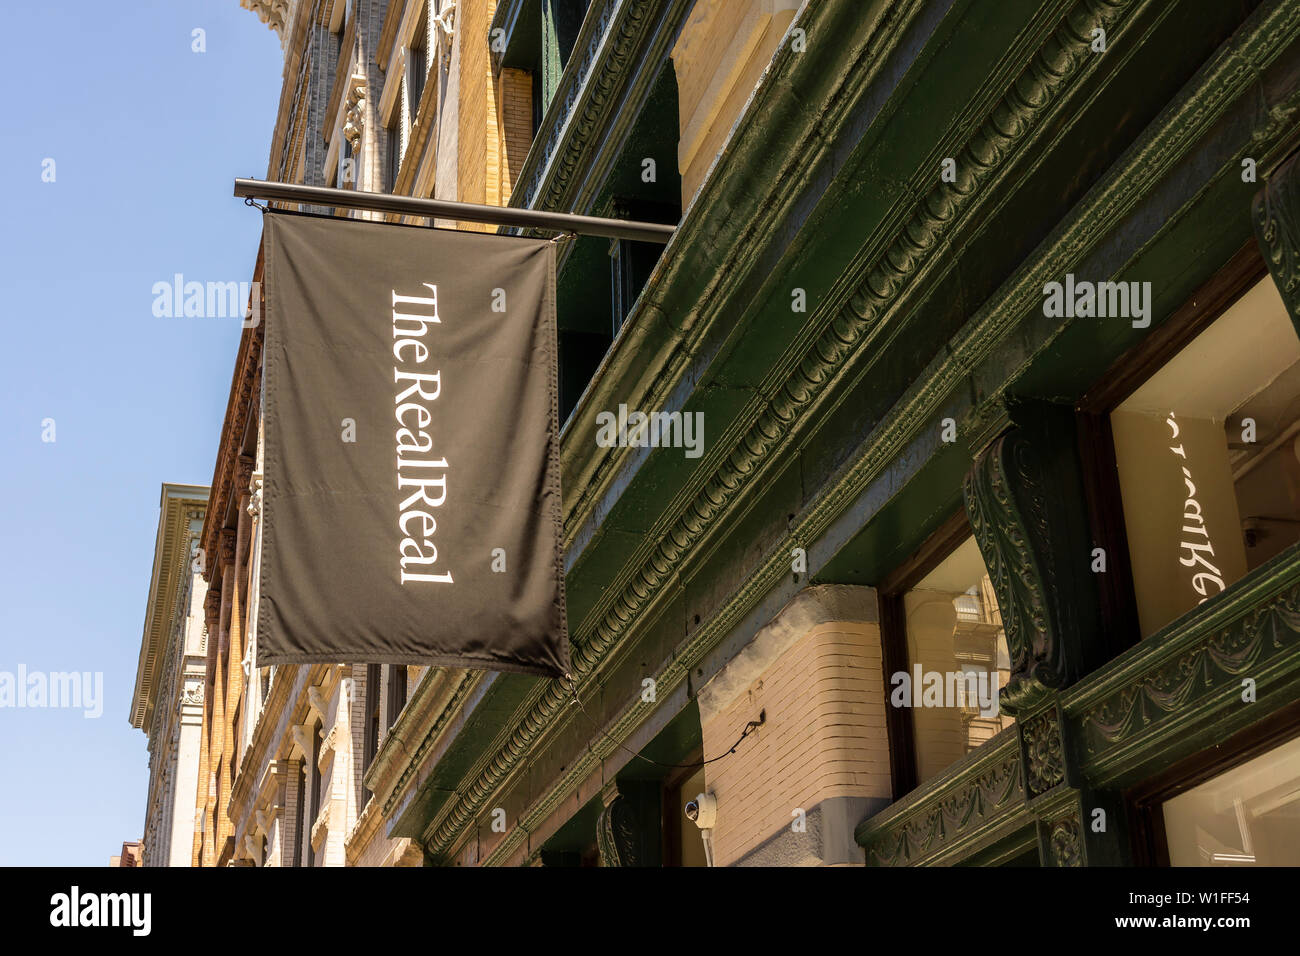 The RealReal luxury consignment store in the Soho neighborhood of New York on Wednesday, June 26, 2019. The startup, which sells after authentication previously owned luxury goods on consignment is launching its initial public offering later this week. The estimate for the total luxury resale market in the U.S. is $6 billion. (© Richard B. Levine) Stock Photo